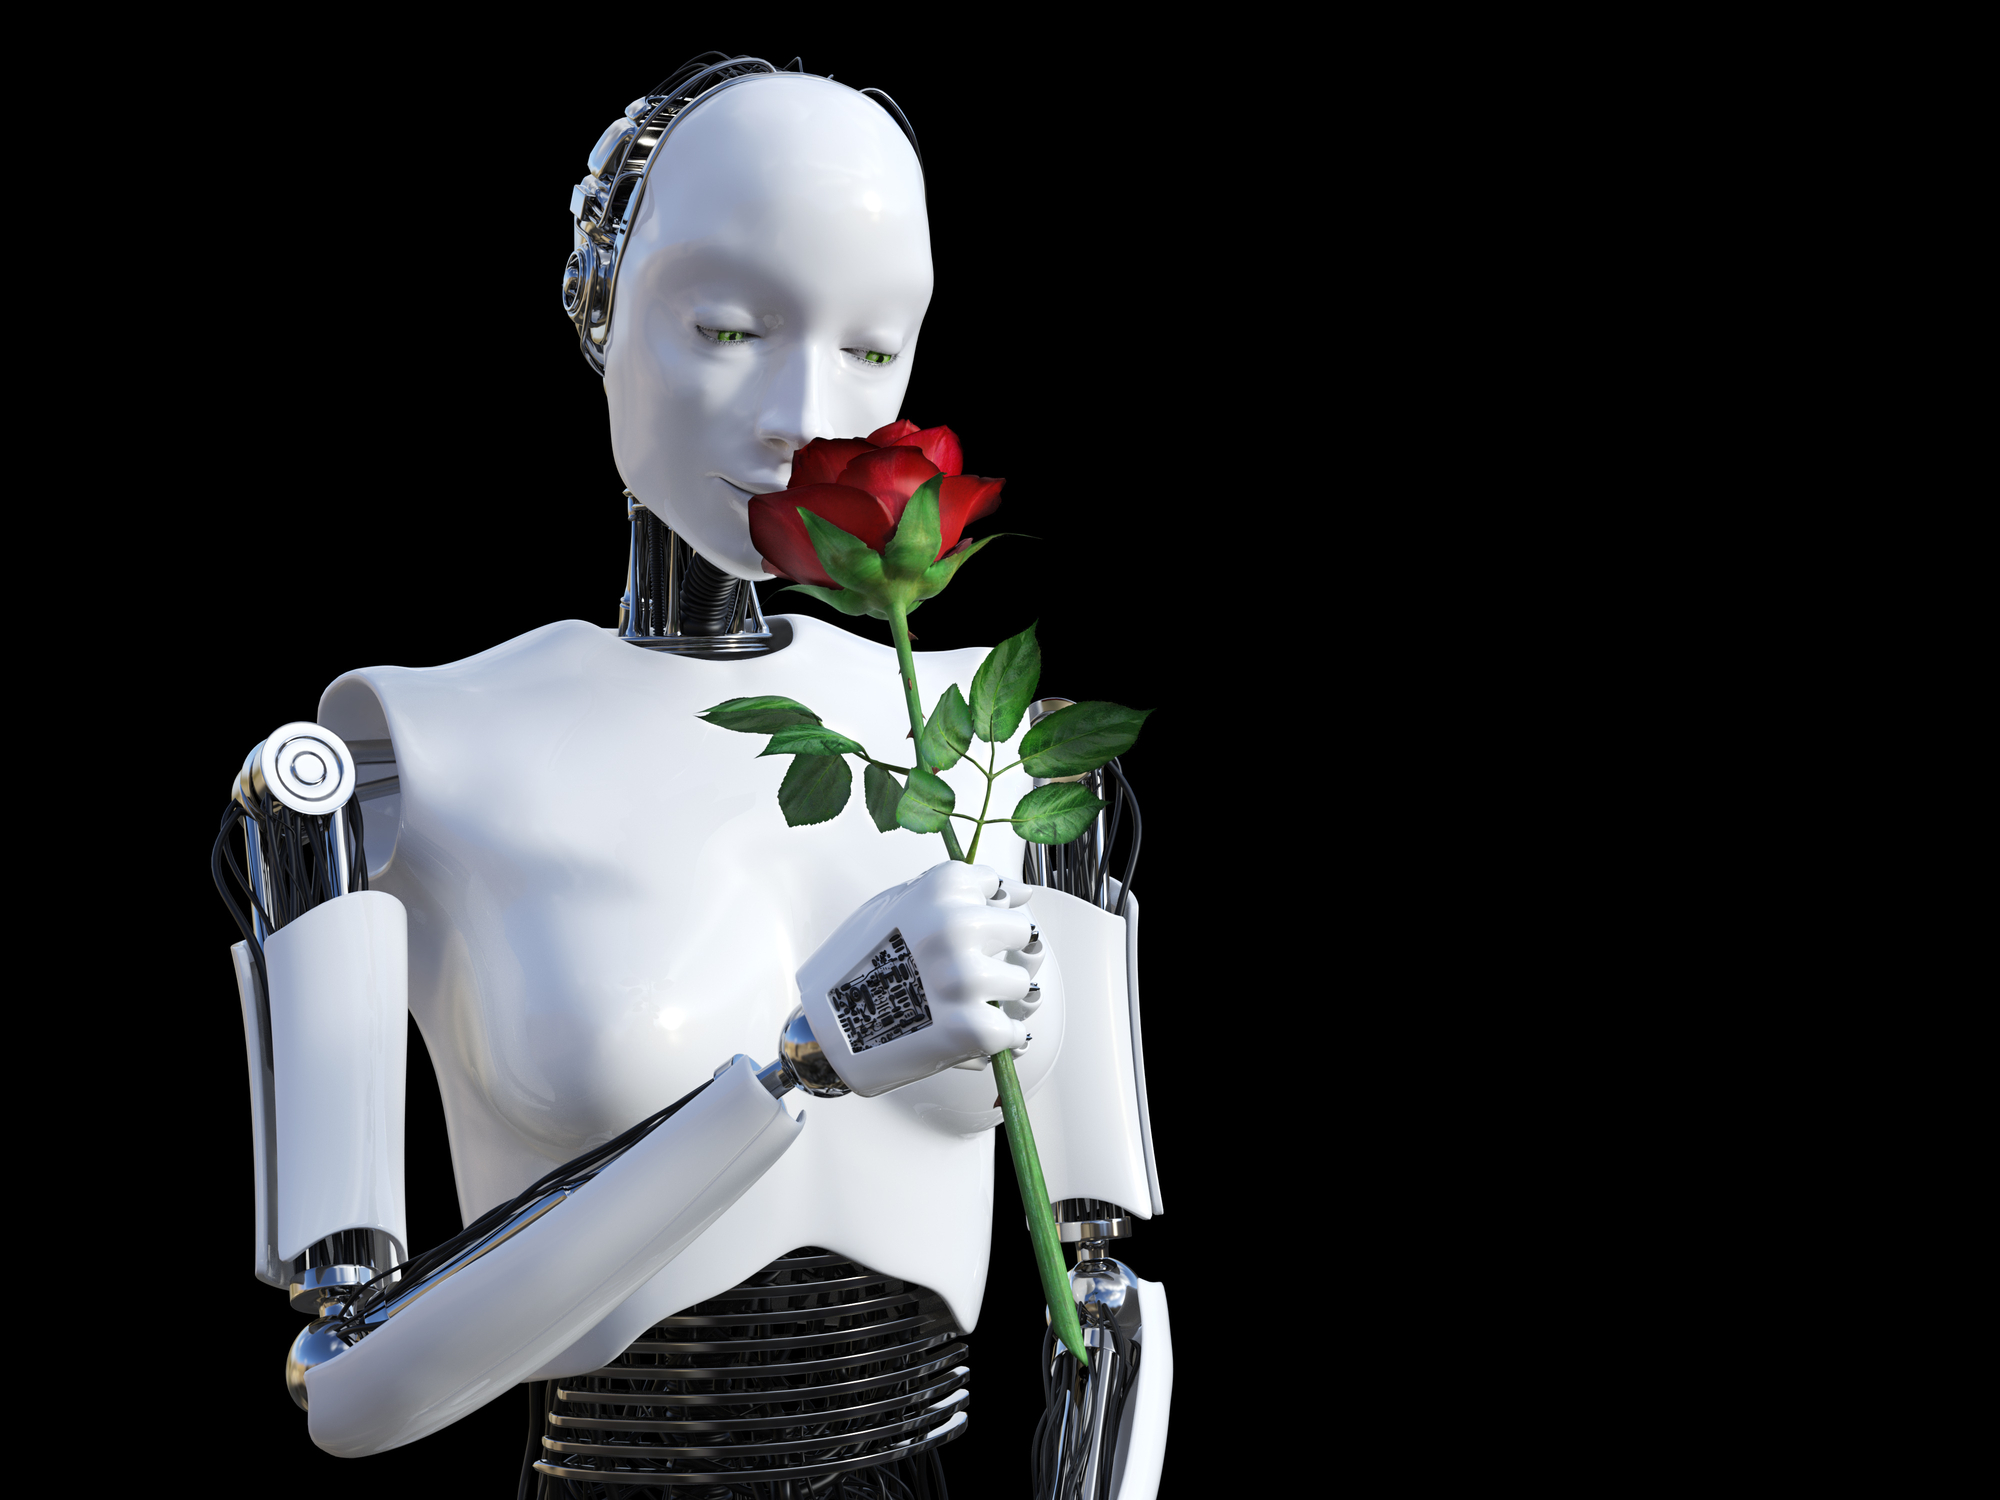 3D rendering of a female robot holding a red rose that she is smelling. Black background.